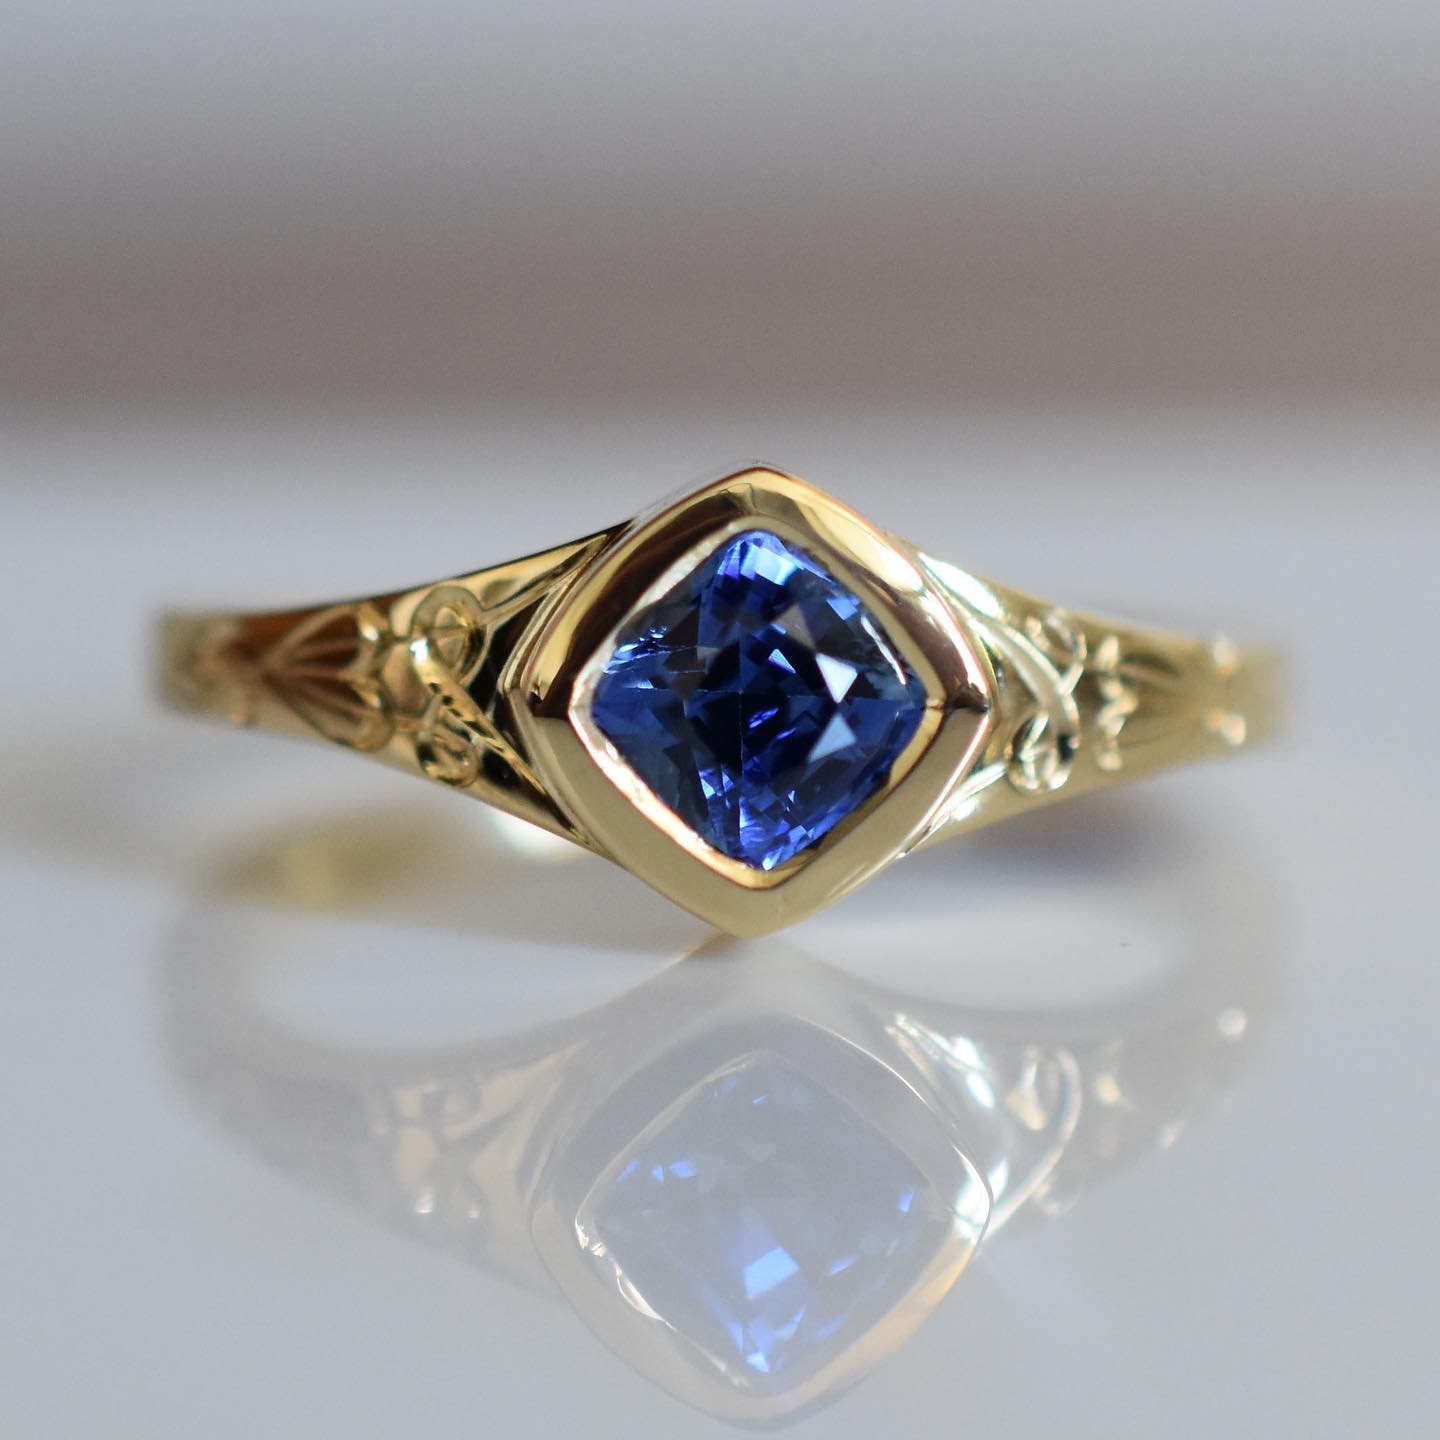 ✨✨Brand new Elowen ✨✨ This time she is set with the prettiest blue sapphire. This sapphire was calling my name&hellip;&rdquo;Erin, Erin I&rsquo;m the prettiest even sided cushion cut that you can flip into the diamond shape&hellip;&rdquo; so of cours